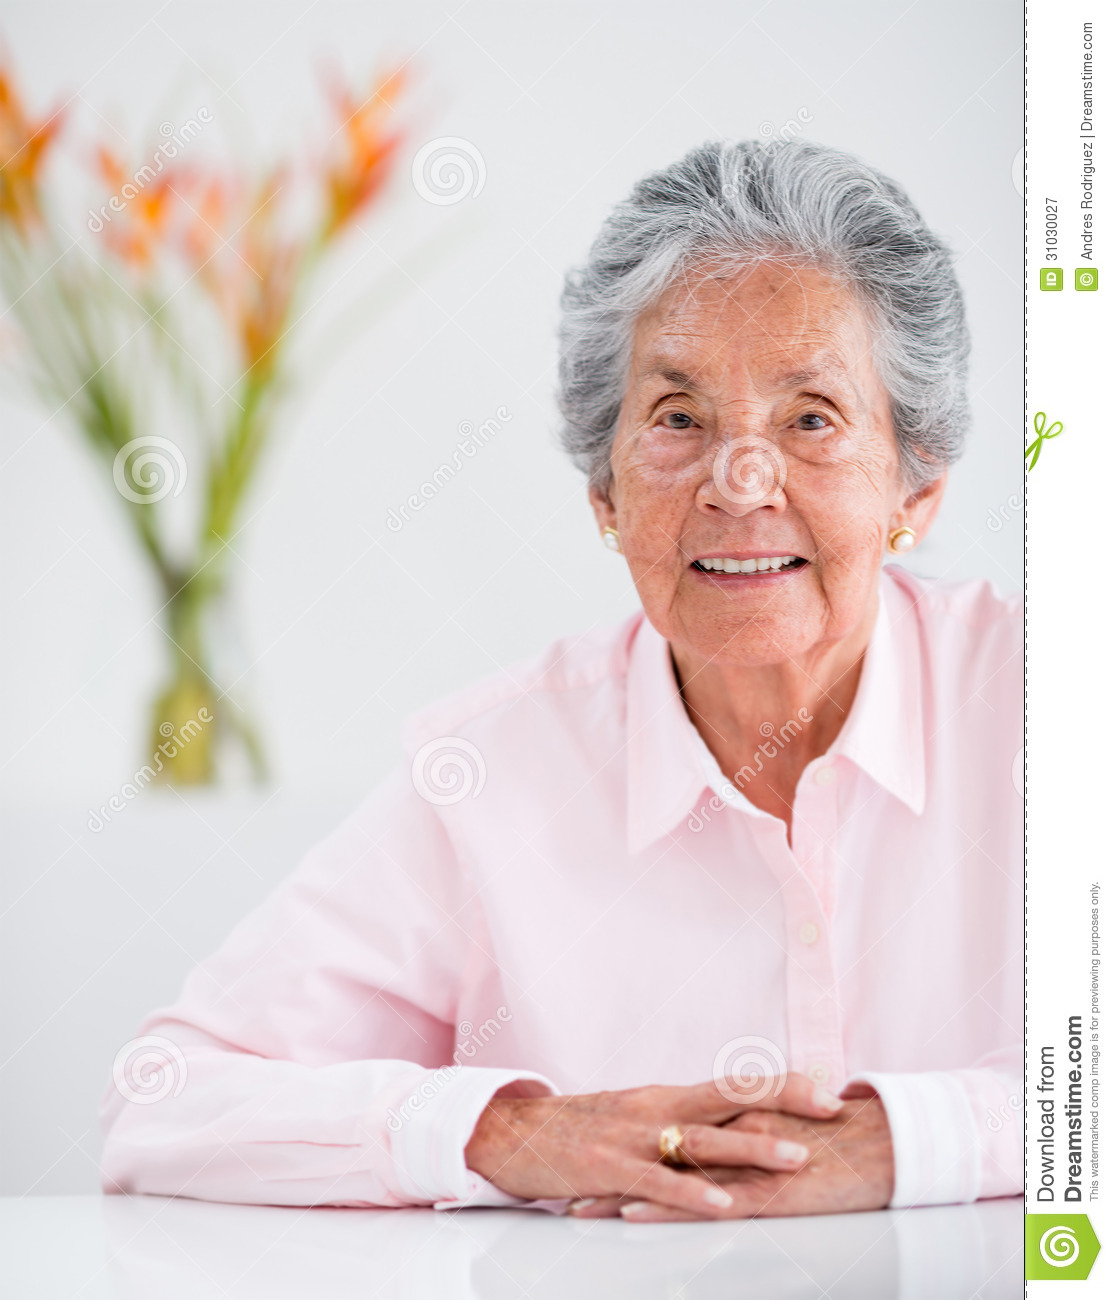 Lovely Elder Woman Royalty Free Stock Photography   Image  31030027